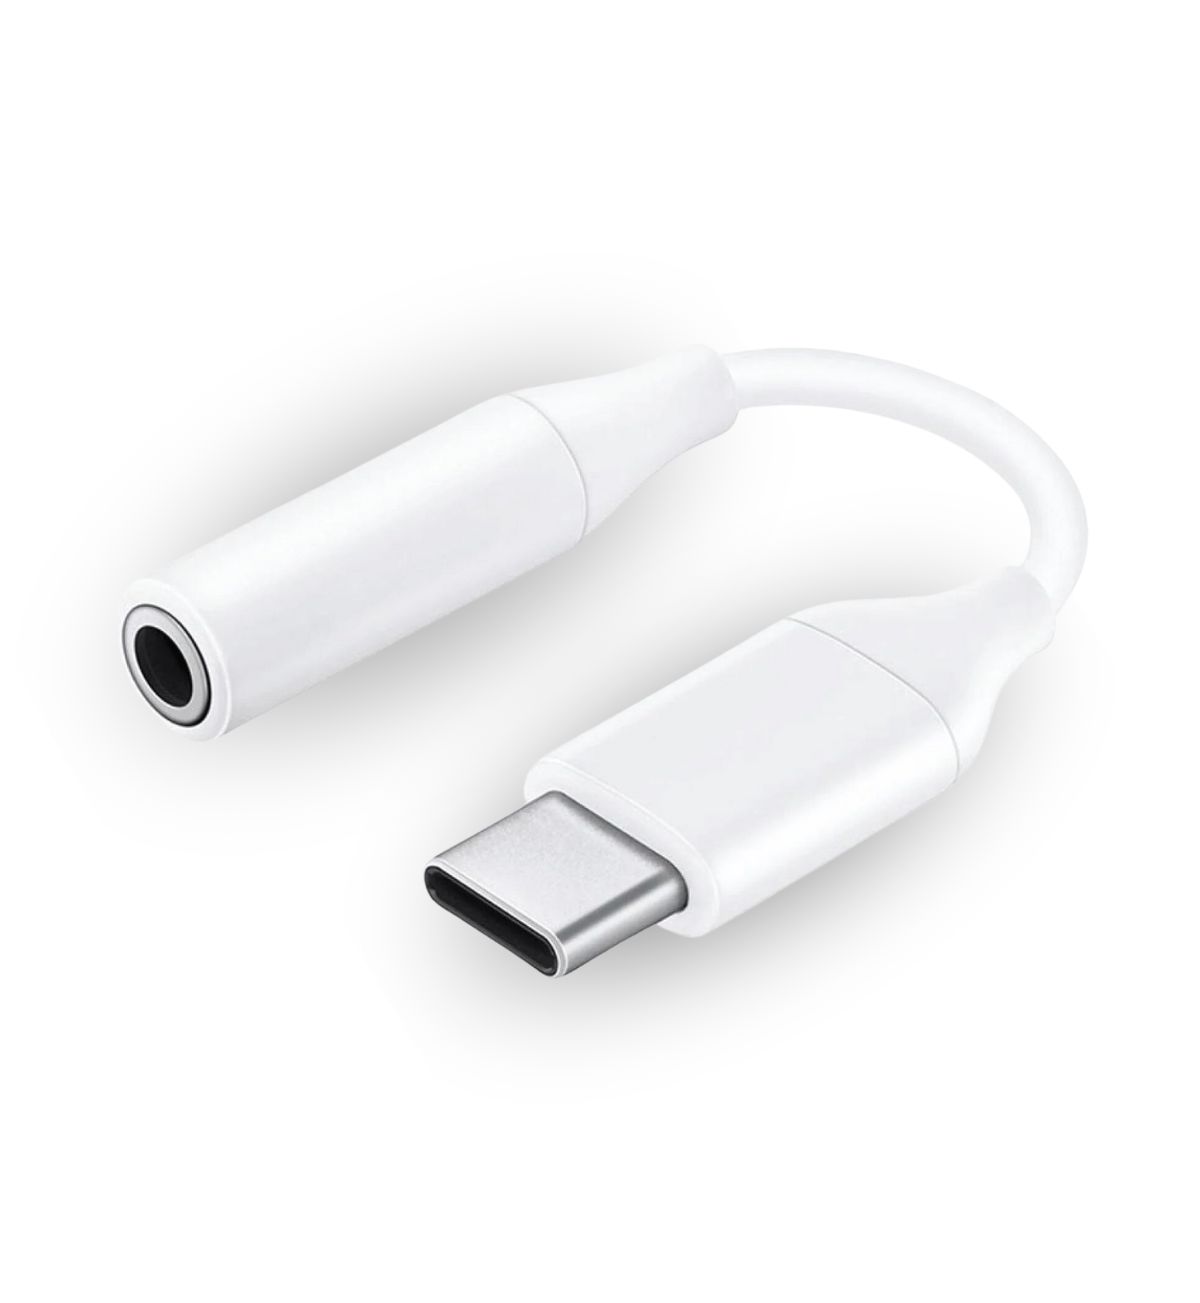 Official Samsung USB C to 3.5mm Audio Jack Adapter (UK). Seamlessly connect your USB-C phone to your favorite 3.5mm headphones and enjoy uninterrupted, high-quality audio.